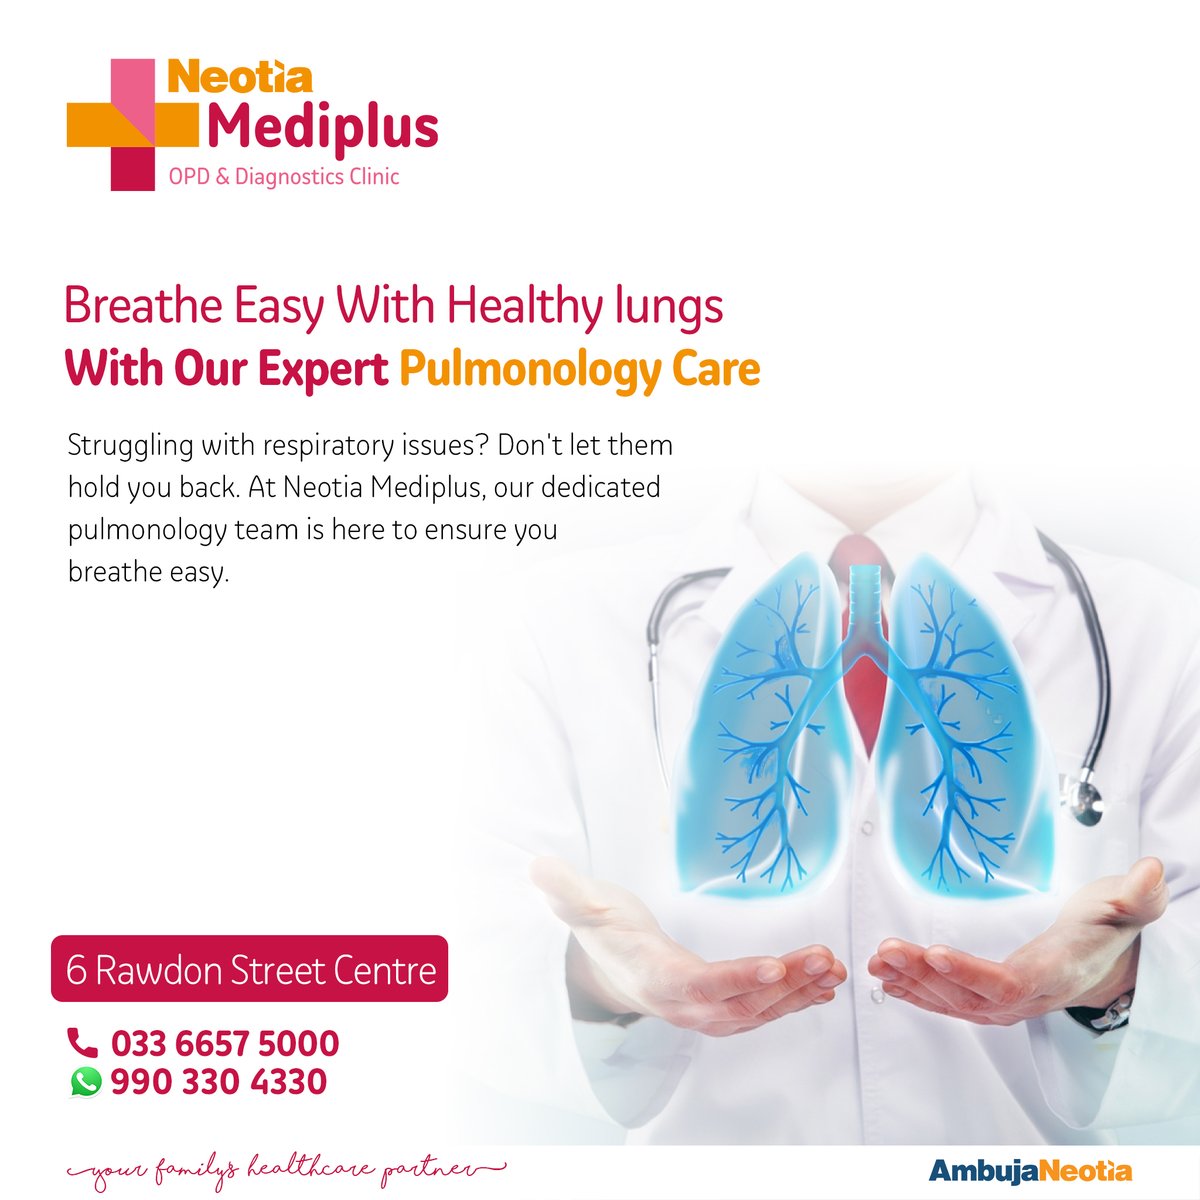 Unlock healthier lungs with Neotia Mediplus OPD & Diagnostic Clinic! Experiencing coughing, shortness of breath or chest discomfort? Over 10M in India suffer from lung issues. Early detection is key! Consult our expert pulmonologists. #HealthyLungs #RespiratoryCare #AmbujaNeotia